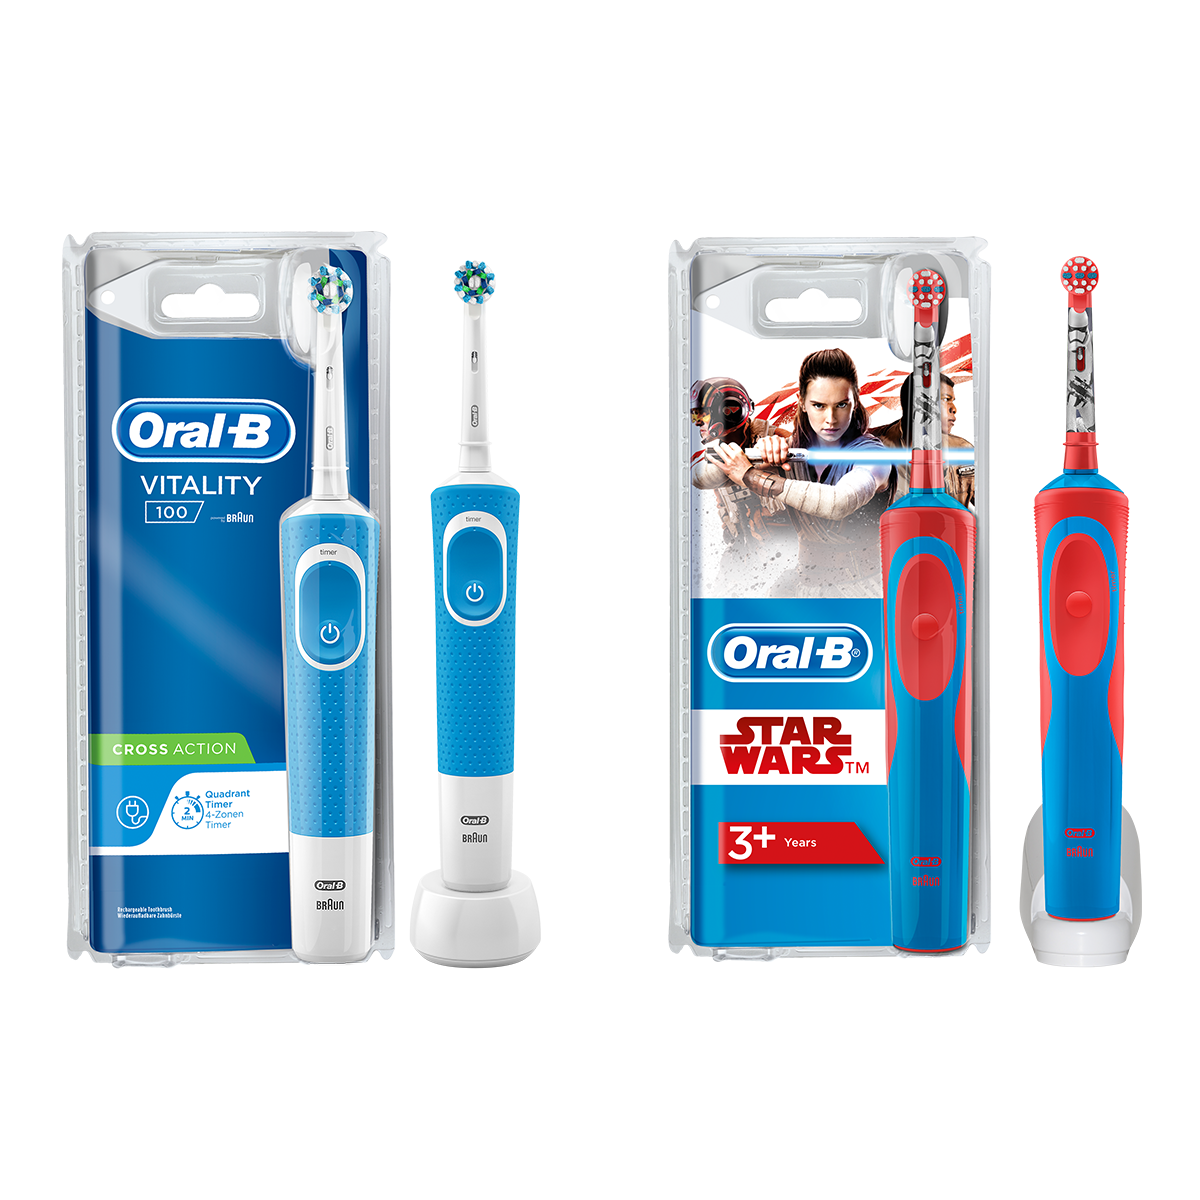 Oral B Vitality 100 Blue Criss Cross Electric Rechargeable Toothbrush Powered by Braun and Oral-B Kids